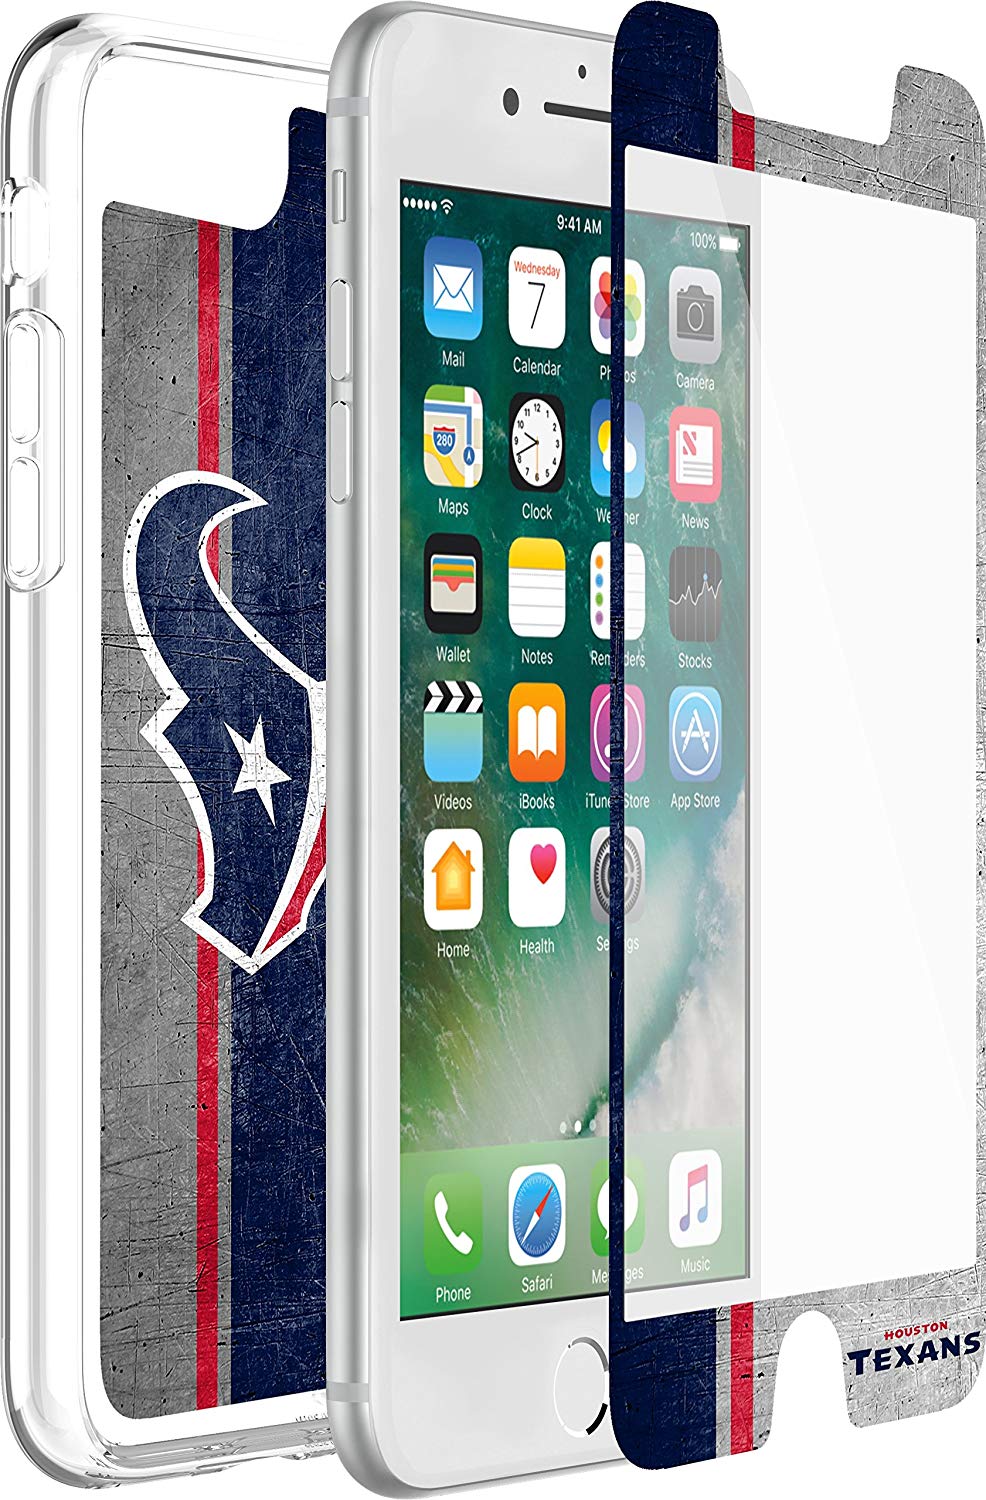 OtterBox ALPHA GLASS Screen Protector for Apple iPhone 6/6S/7/8 - Houston Texans (New)